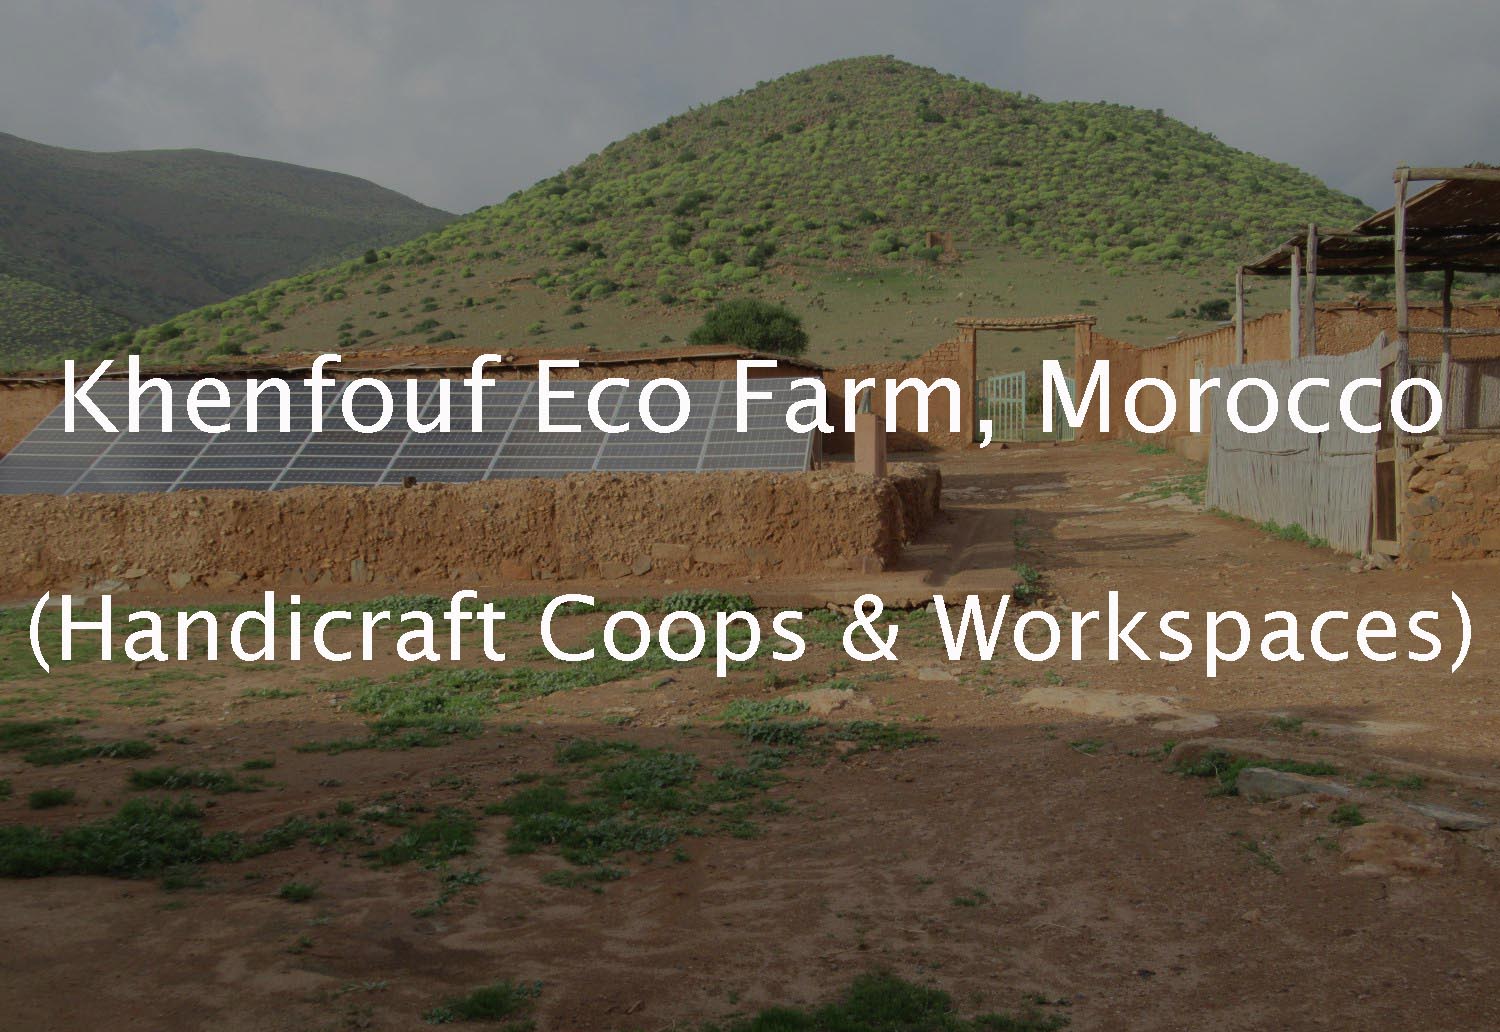 Khenfouf Sustainable Farm (Handicraft Cooperatives & Workspaces Collection)